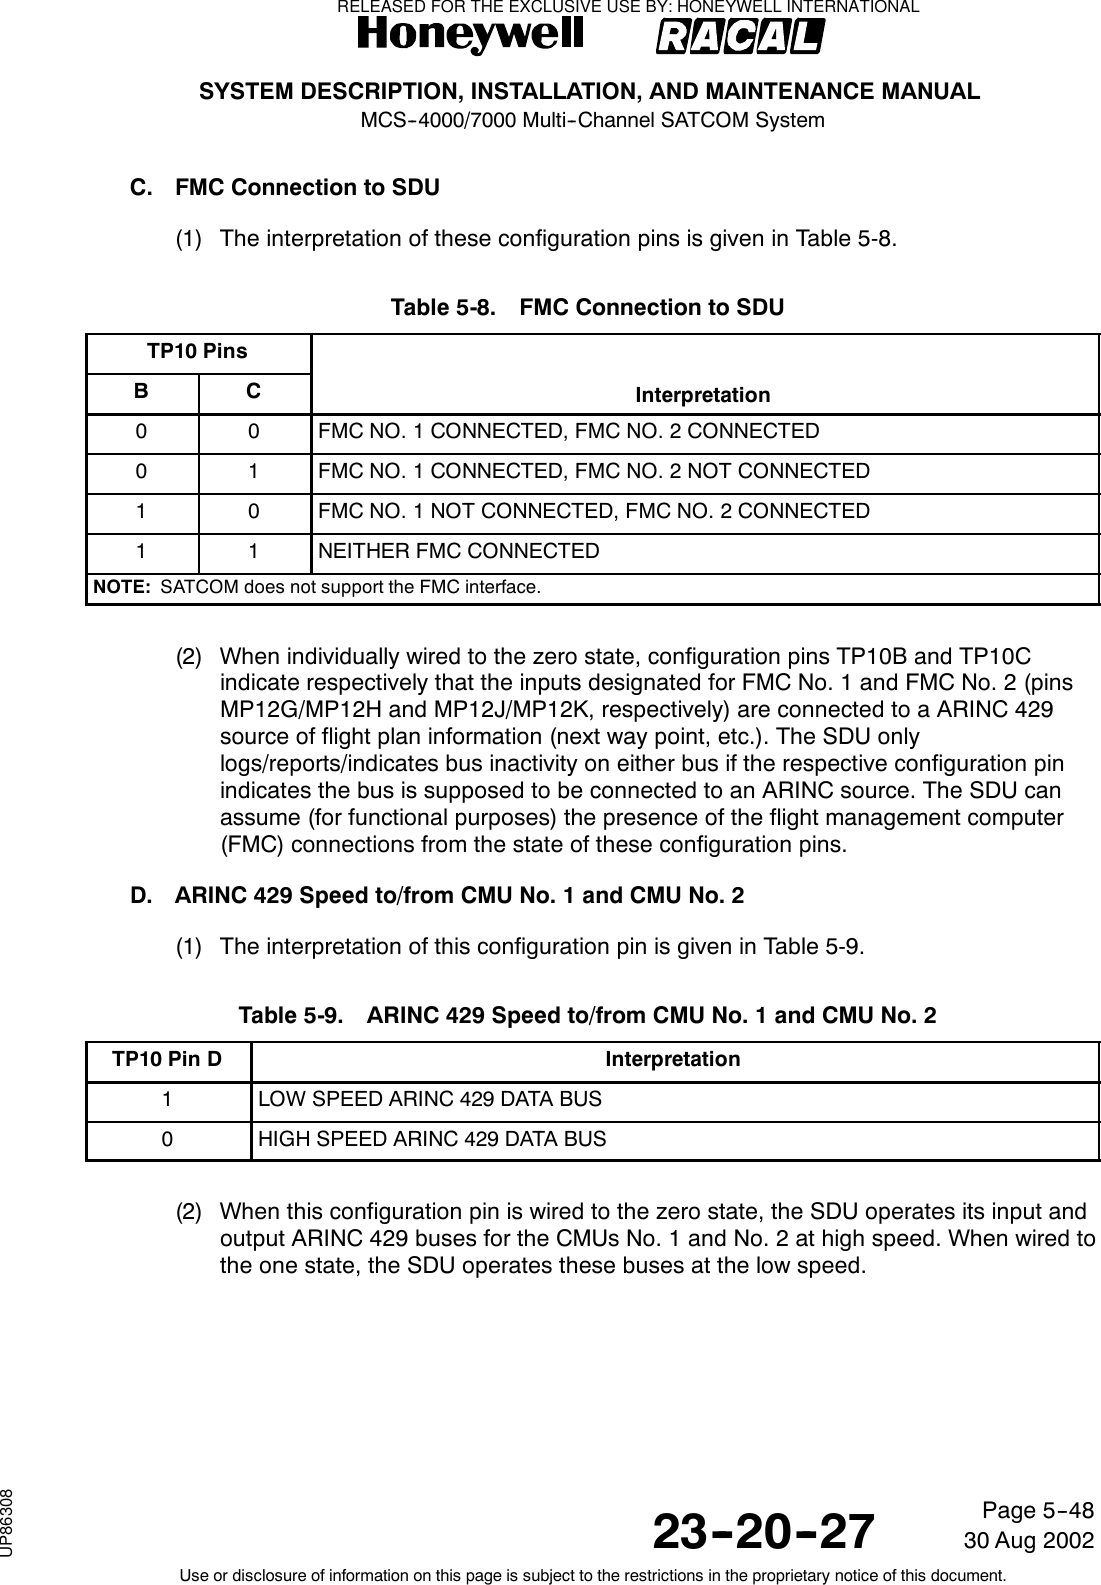 SYSTEM DESCRIPTION, INSTALLATION, AND MAINTENANCE MANUALMCS--4000/7000 Multi--Channel SATCOM System23--20--2730 Aug 2002Use or disclosure of information on this page is subject to the restrictions in the proprietary notice of this document.Page 5--48C. FMC Connection to SDU(1) The interpretation of these configuration pins is given in Table 5-8.Table 5-8. FMC Connection to SDUTP10 PinsB C Interpretation0 0 FMC NO. 1 CONNECTED, FMC NO. 2 CONNECTED0 1 FMC NO. 1 CONNECTED, FMC NO. 2 NOT CONNECTED1 0 FMC NO. 1 NOT CONNECTED, FMC NO. 2 CONNECTED1 1 NEITHER FMC CONNECTEDNOTE: SATCOM does not support the FMC interface.(2) When individually wired to the zero state, configuration pins TP10B and TP10Cindicate respectively that the inputs designated for FMC No. 1 and FMC No. 2 (pinsMP12G/MP12H and MP12J/MP12K, respectively) are connected to a ARINC 429source of flight plan information (next way point, etc.). The SDU onlylogs/reports/indicates bus inactivity on either bus if the respective configuration pinindicates the bus is supposed to be connected to an ARINC source. The SDU canassume (for functional purposes) the presence of the flight management computer(FMC) connections from the state of these configuration pins.D. ARINC 429 Speed to/from CMU No. 1 and CMU No. 2(1) The interpretation of this configuration pin is given in Table 5-9.Table 5-9. ARINC 429 Speed to/from CMU No. 1 and CMU No. 2TP10 Pin D Interpretation1LOW SPEED ARINC 429 DATA BUS0HIGH SPEED ARINC 429 DATA BUS(2) When this configuration pin is wired to the zero state, the SDU operates its input andoutput ARINC 429 buses for the CMUs No. 1 and No. 2 at high speed. When wired tothe one state, the SDU operates these buses at the low speed.RELEASED FOR THE EXCLUSIVE USE BY: HONEYWELL INTERNATIONALUP86308